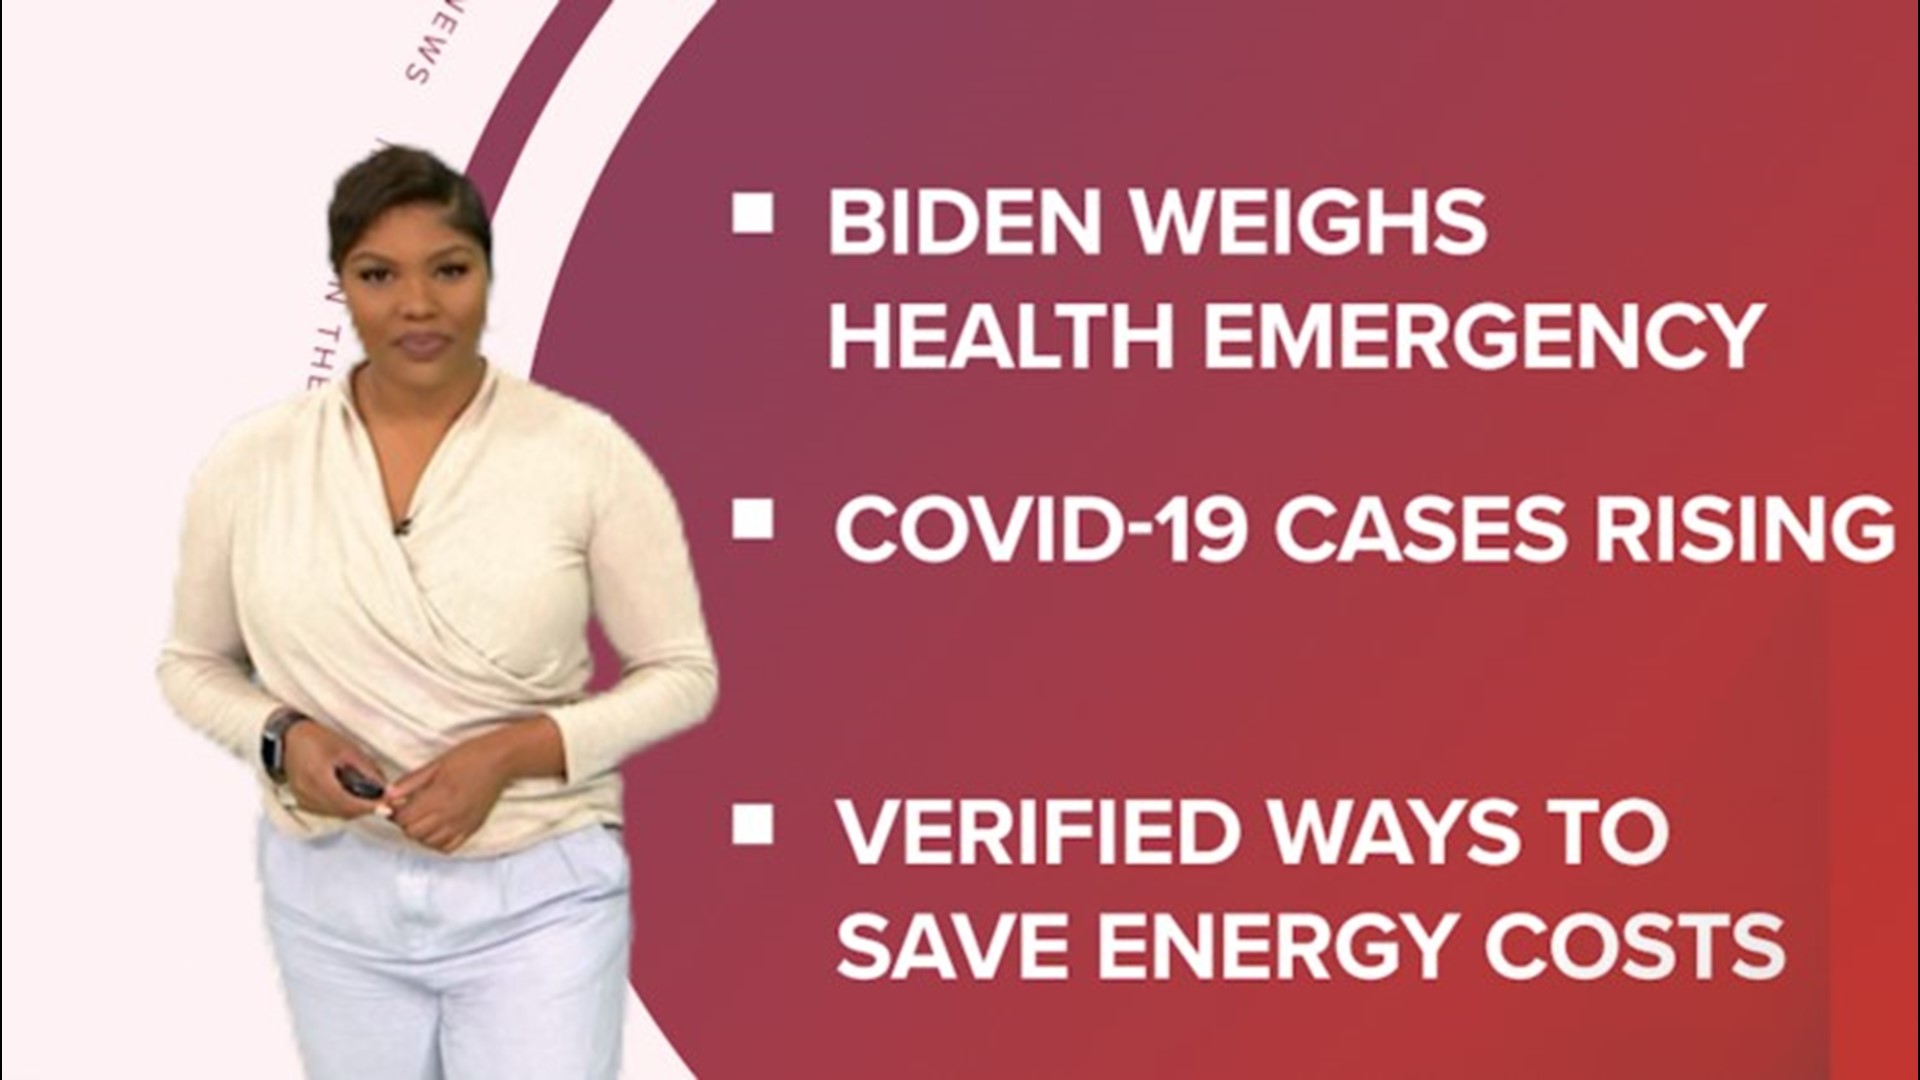 A look at what is happening across the U.S. from President Biden considering a public health emergency to COVID cases on the rise and ways to save on energy costs.